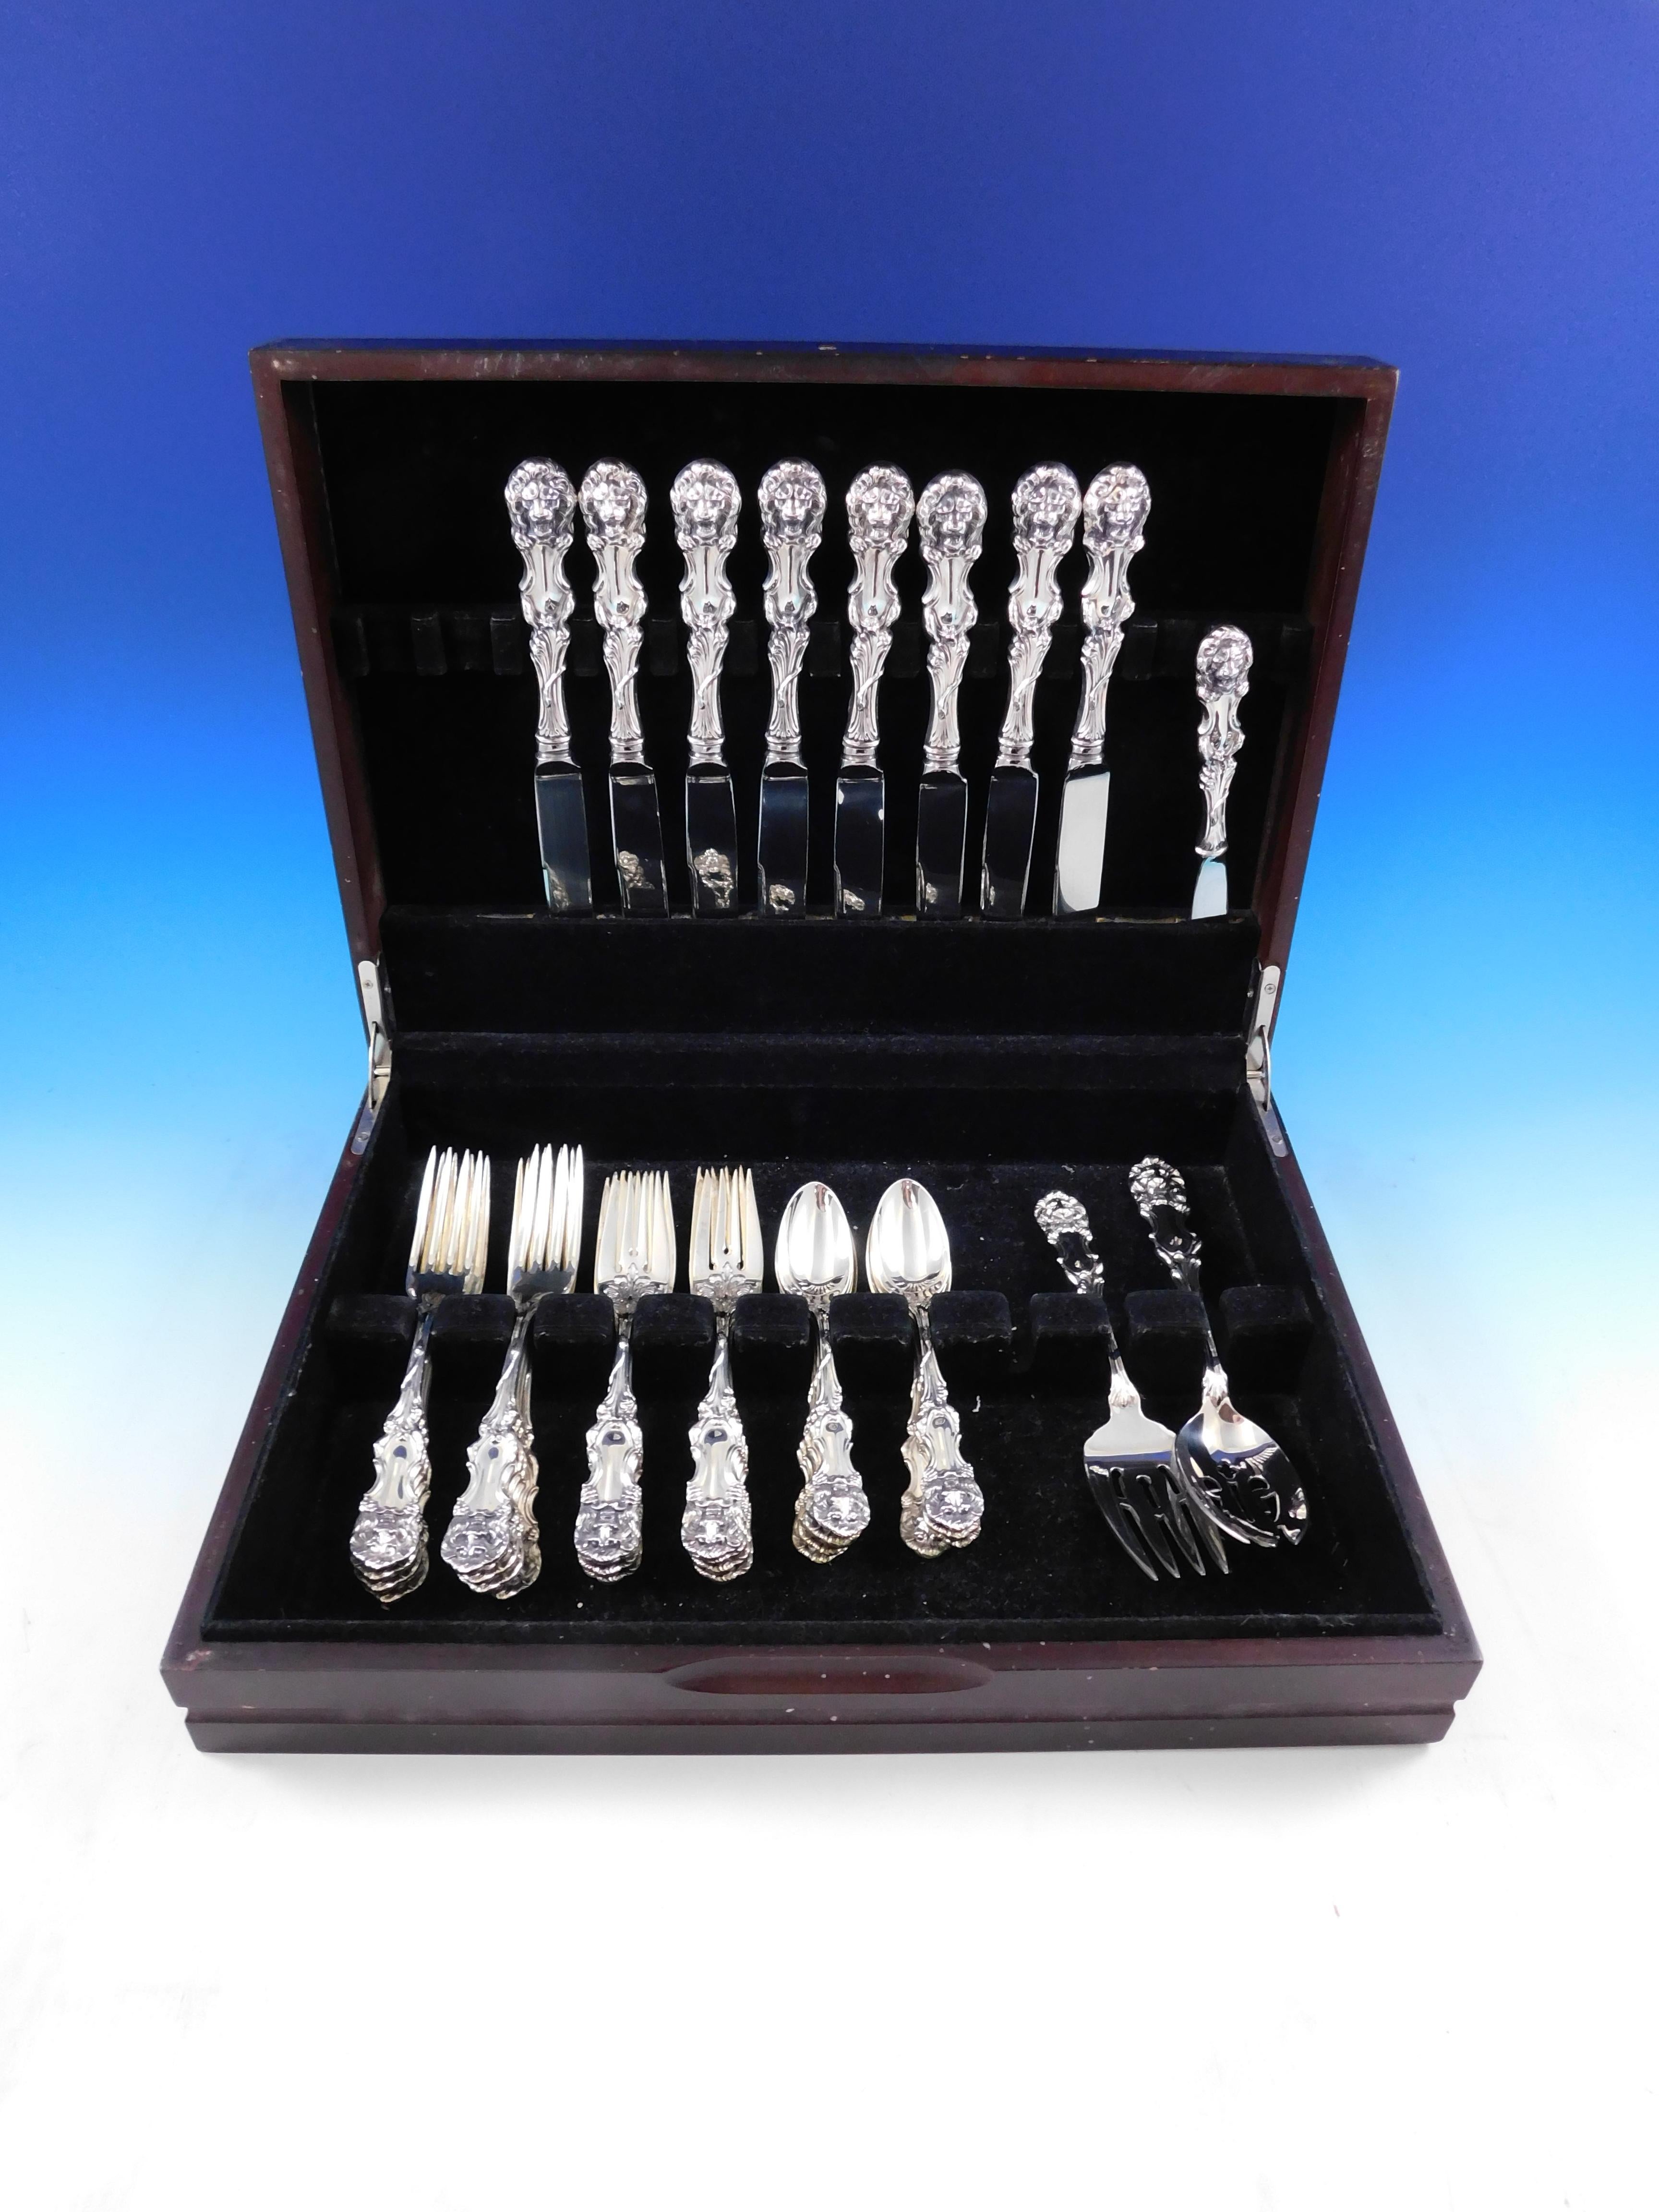 Scarce Lion by Frank Smith sterling silver flatware set, 35 pieces. This fabulous figural pattern features a lions head handle with flowing mane on both sides as well as legs and paws down the handle, surrounding a central shield shaped cartouche.